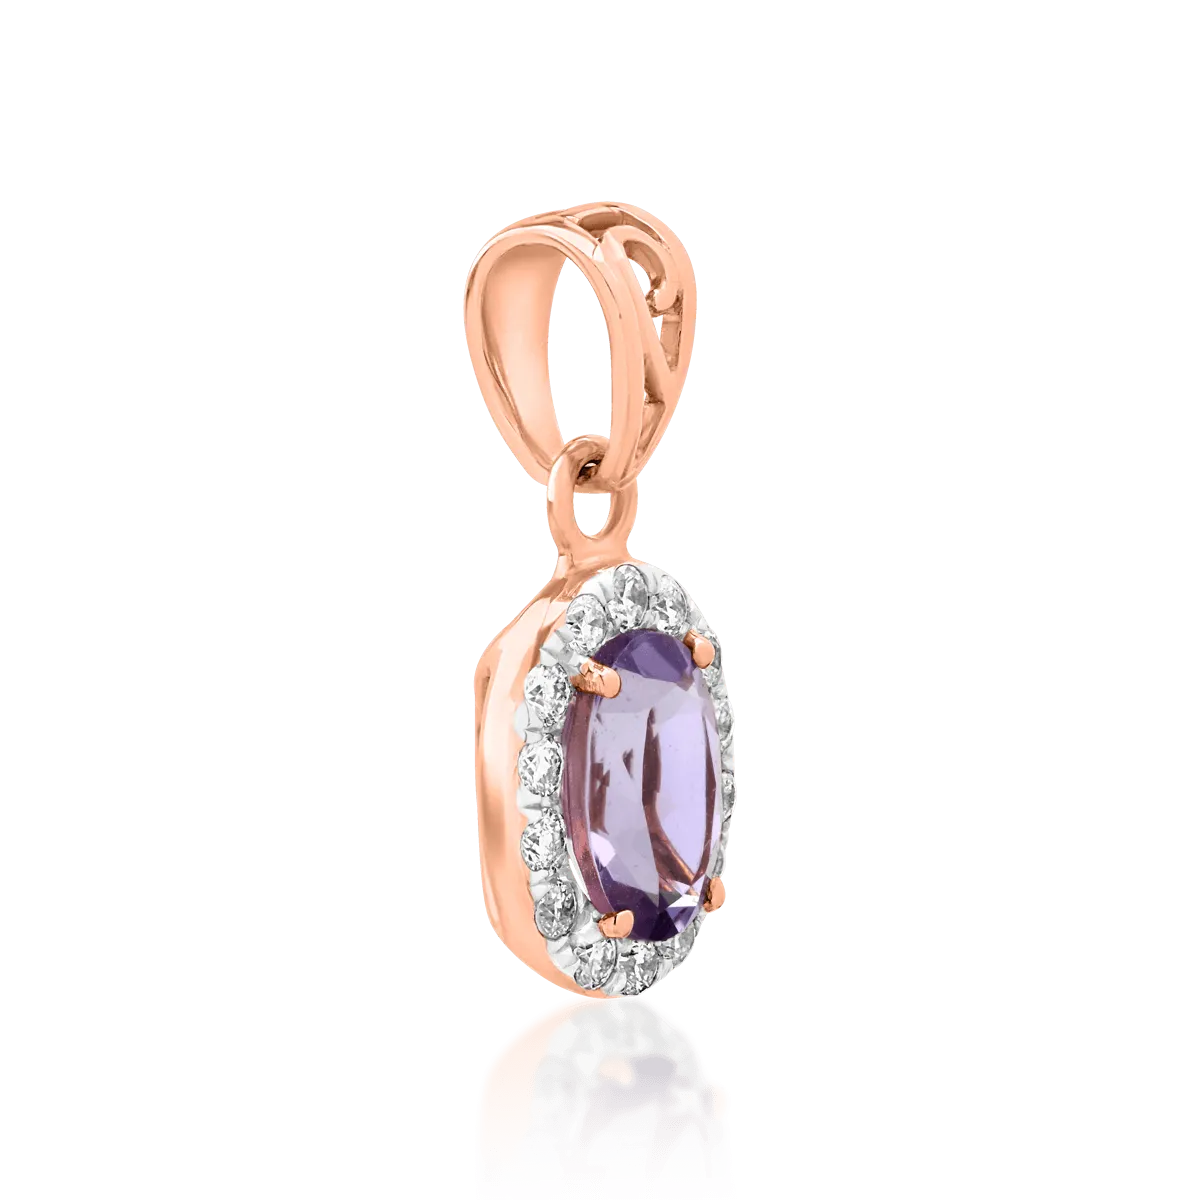 14K rose gold pendant with 0.72ct amethyst and 0.17ct diamonds